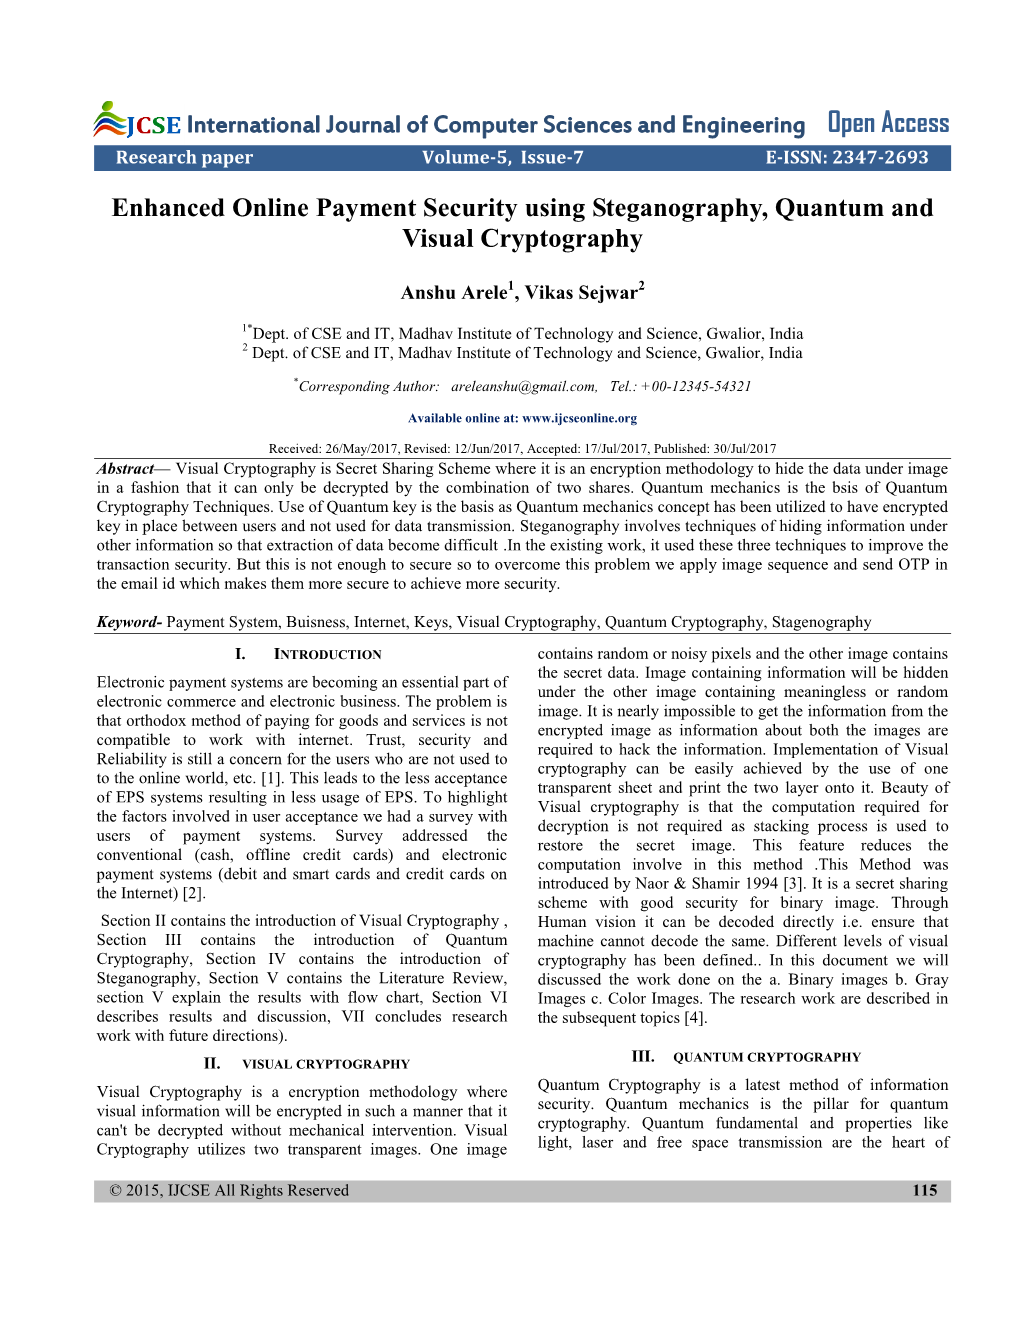 Enhanced Online Payment Security Using Steganography, Quantum and Visual Cryptography